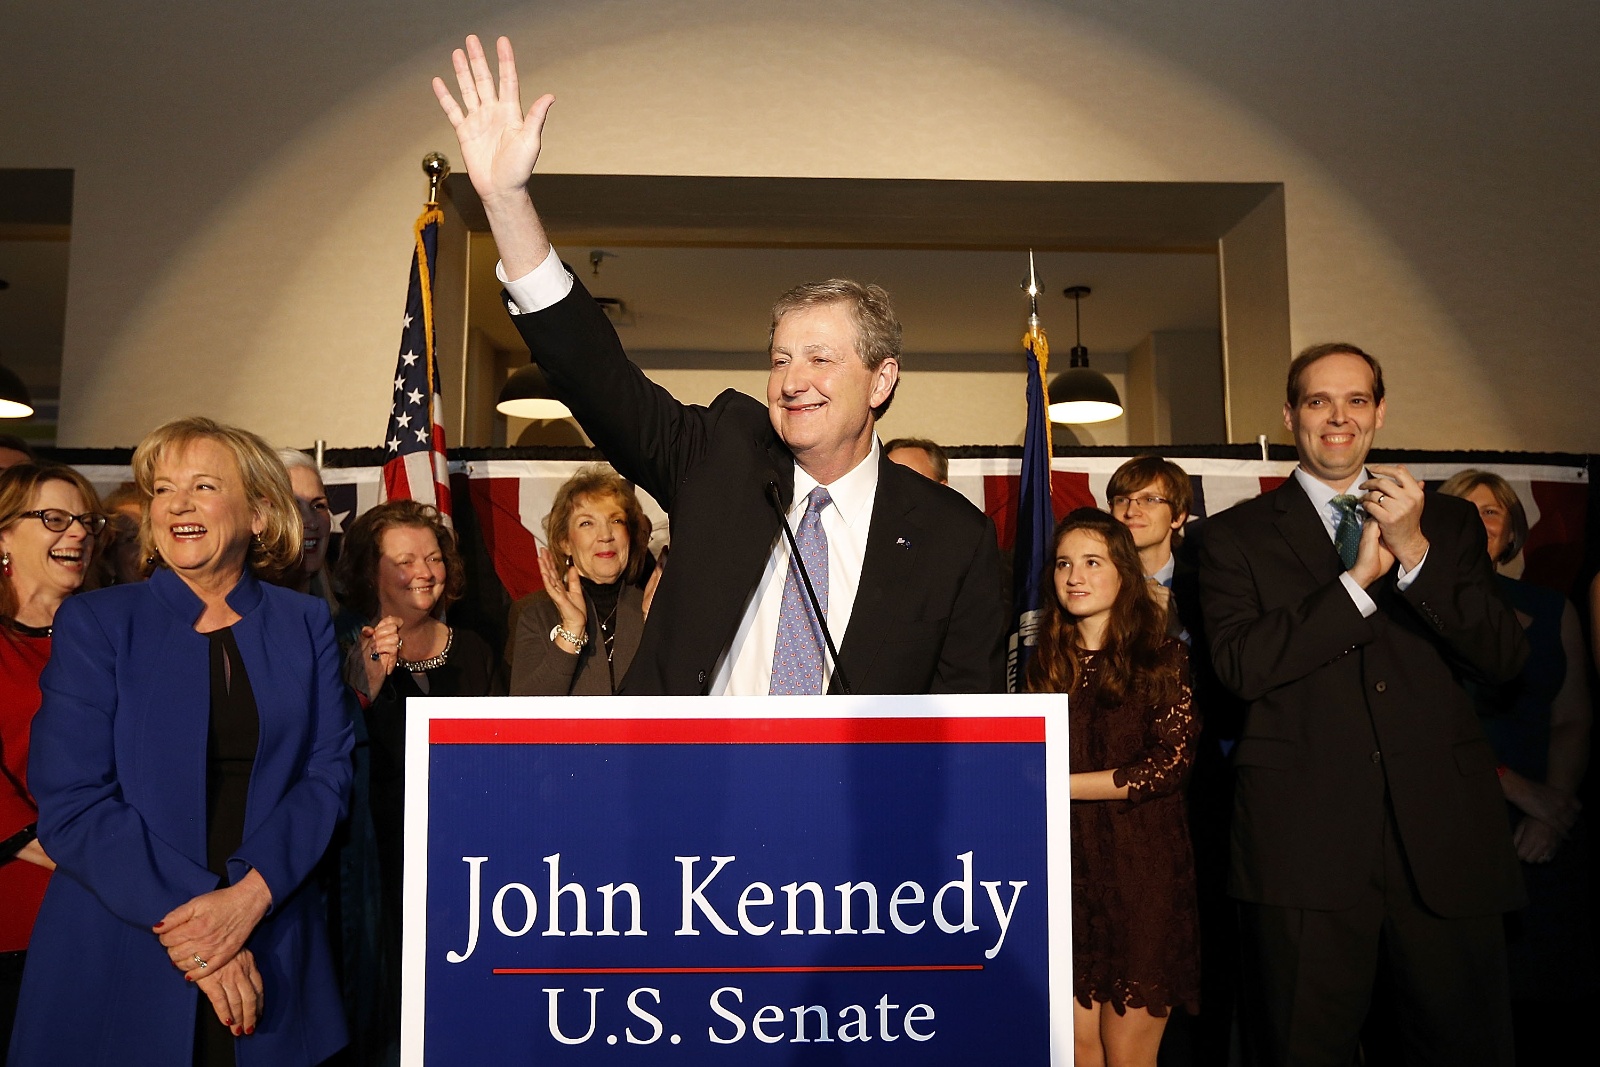 Senator John Kennedy, a Republican from Louisiana, delivers a victory speech during an election party on December 10, 2016 in Baton Rouge, Louisiana.